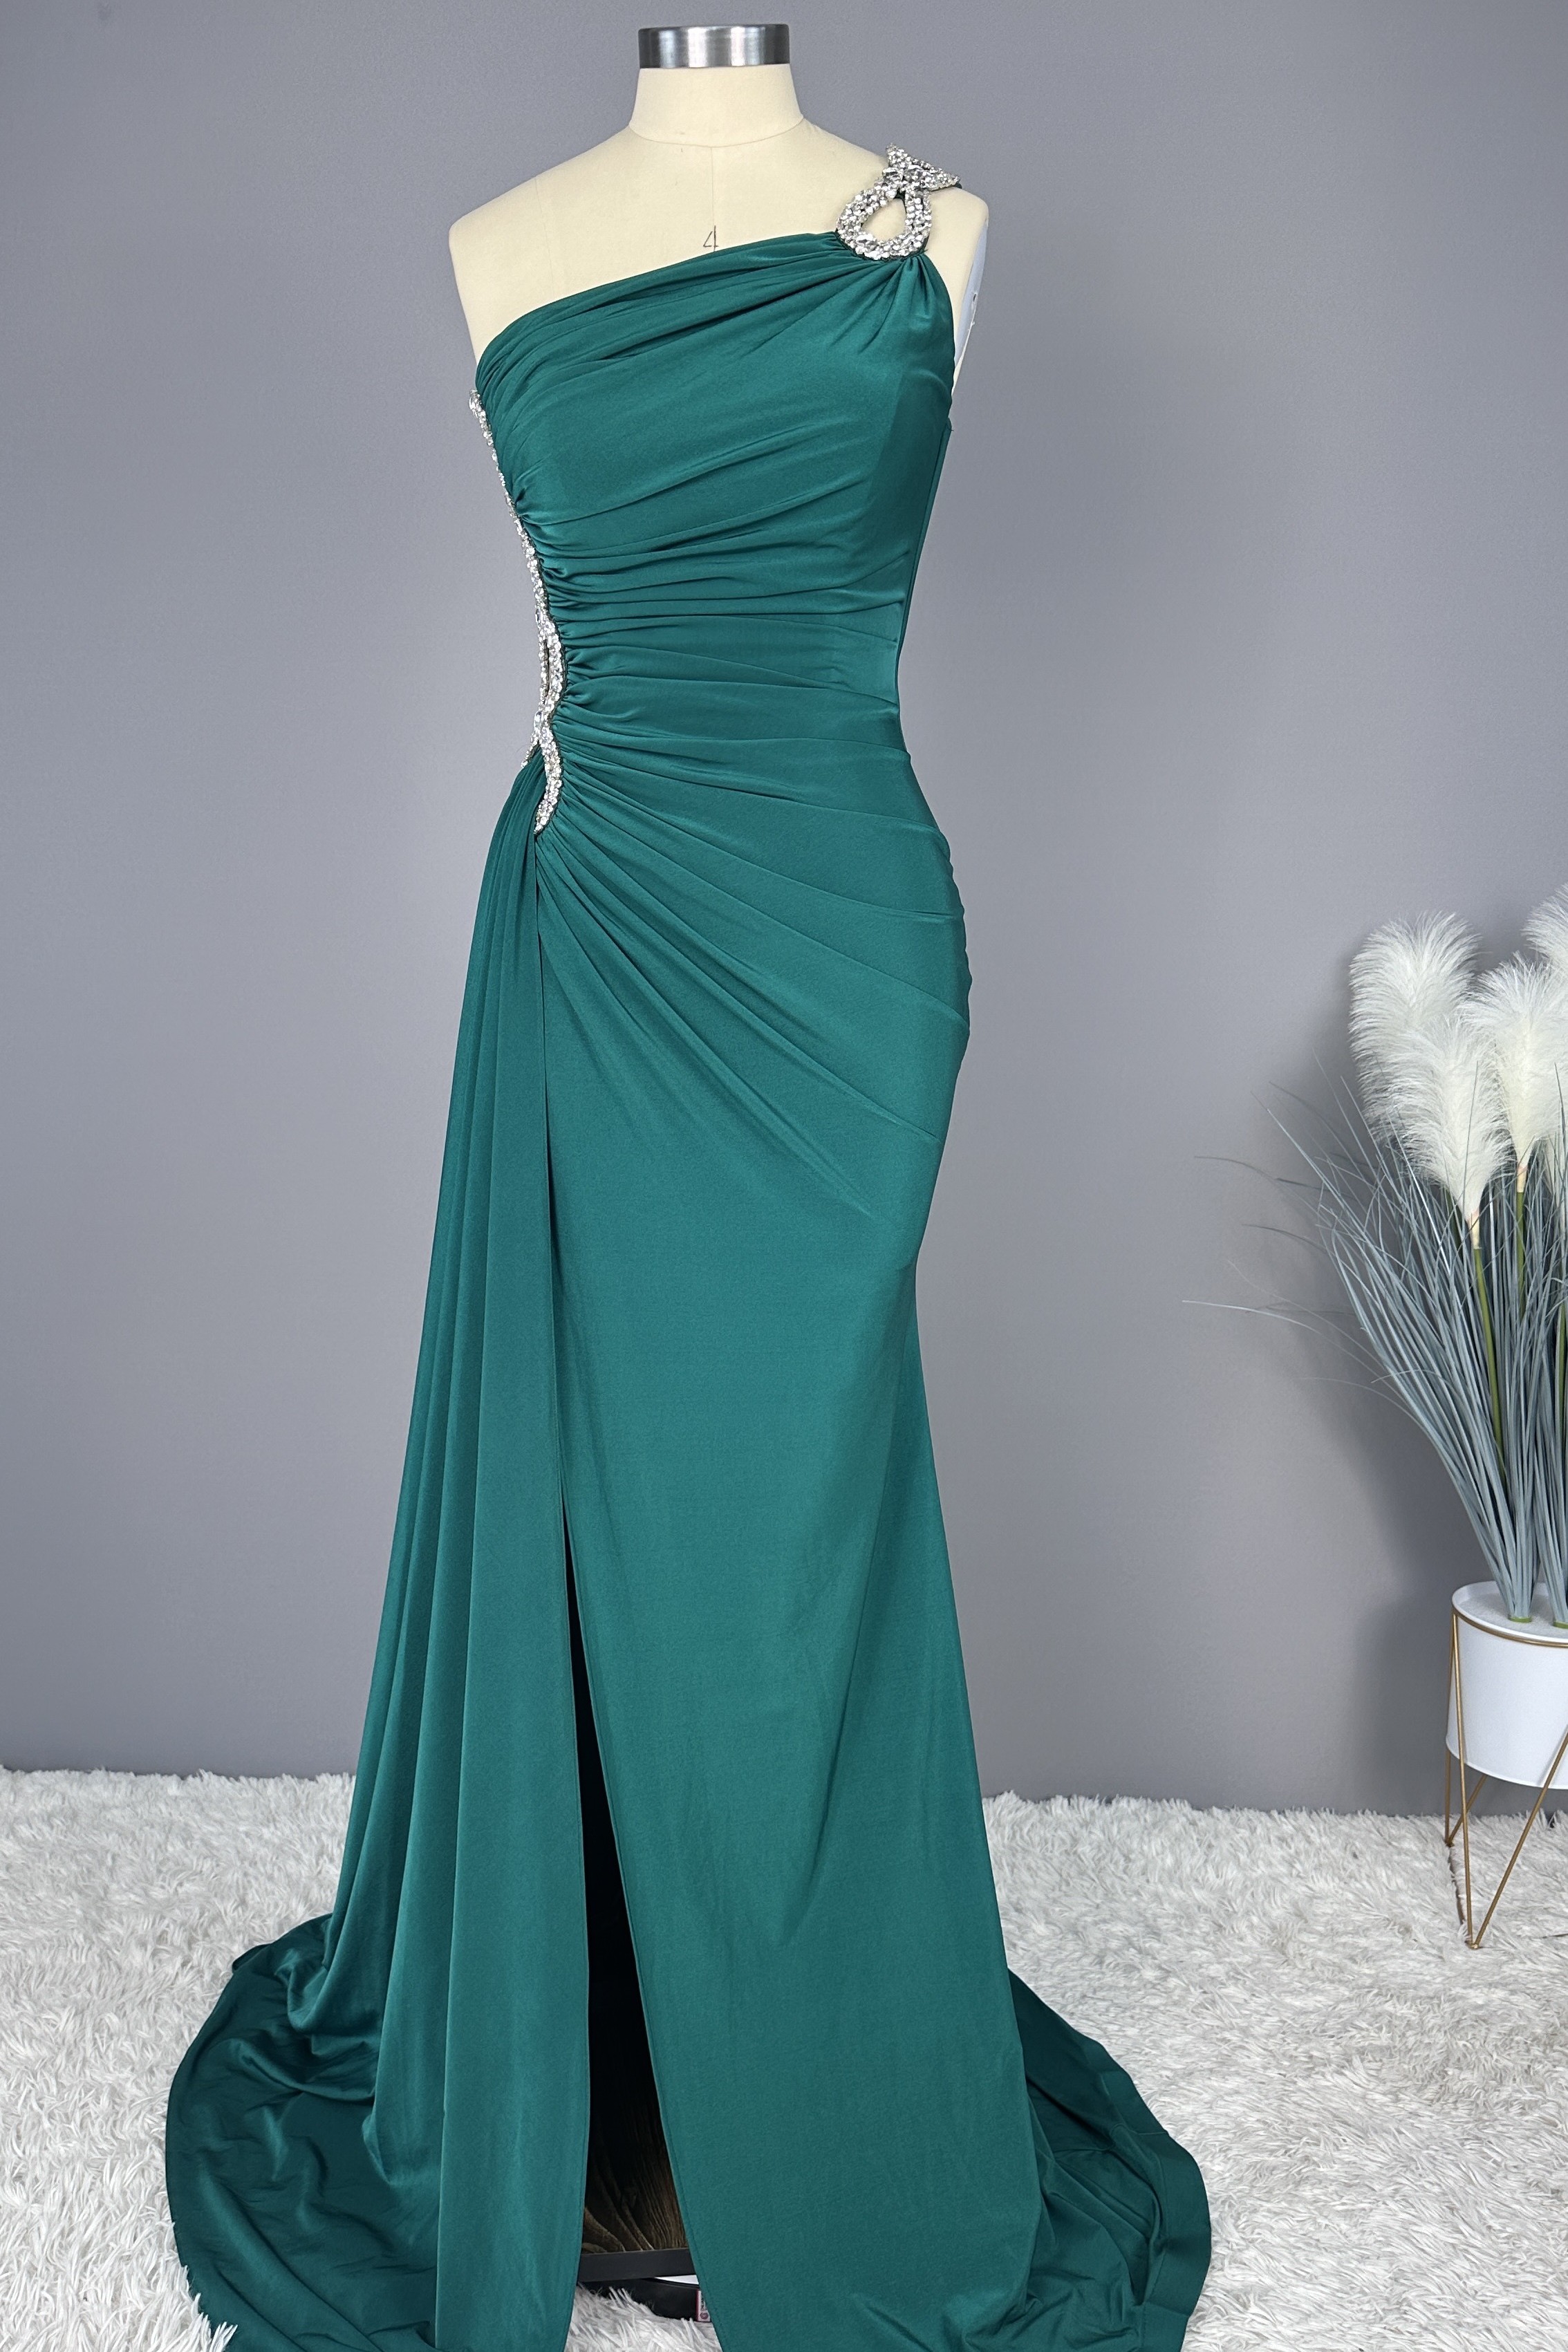 Ovlias Prom Dress Long Emerald Green Sleeveless One Shoulder Appliques YL0298